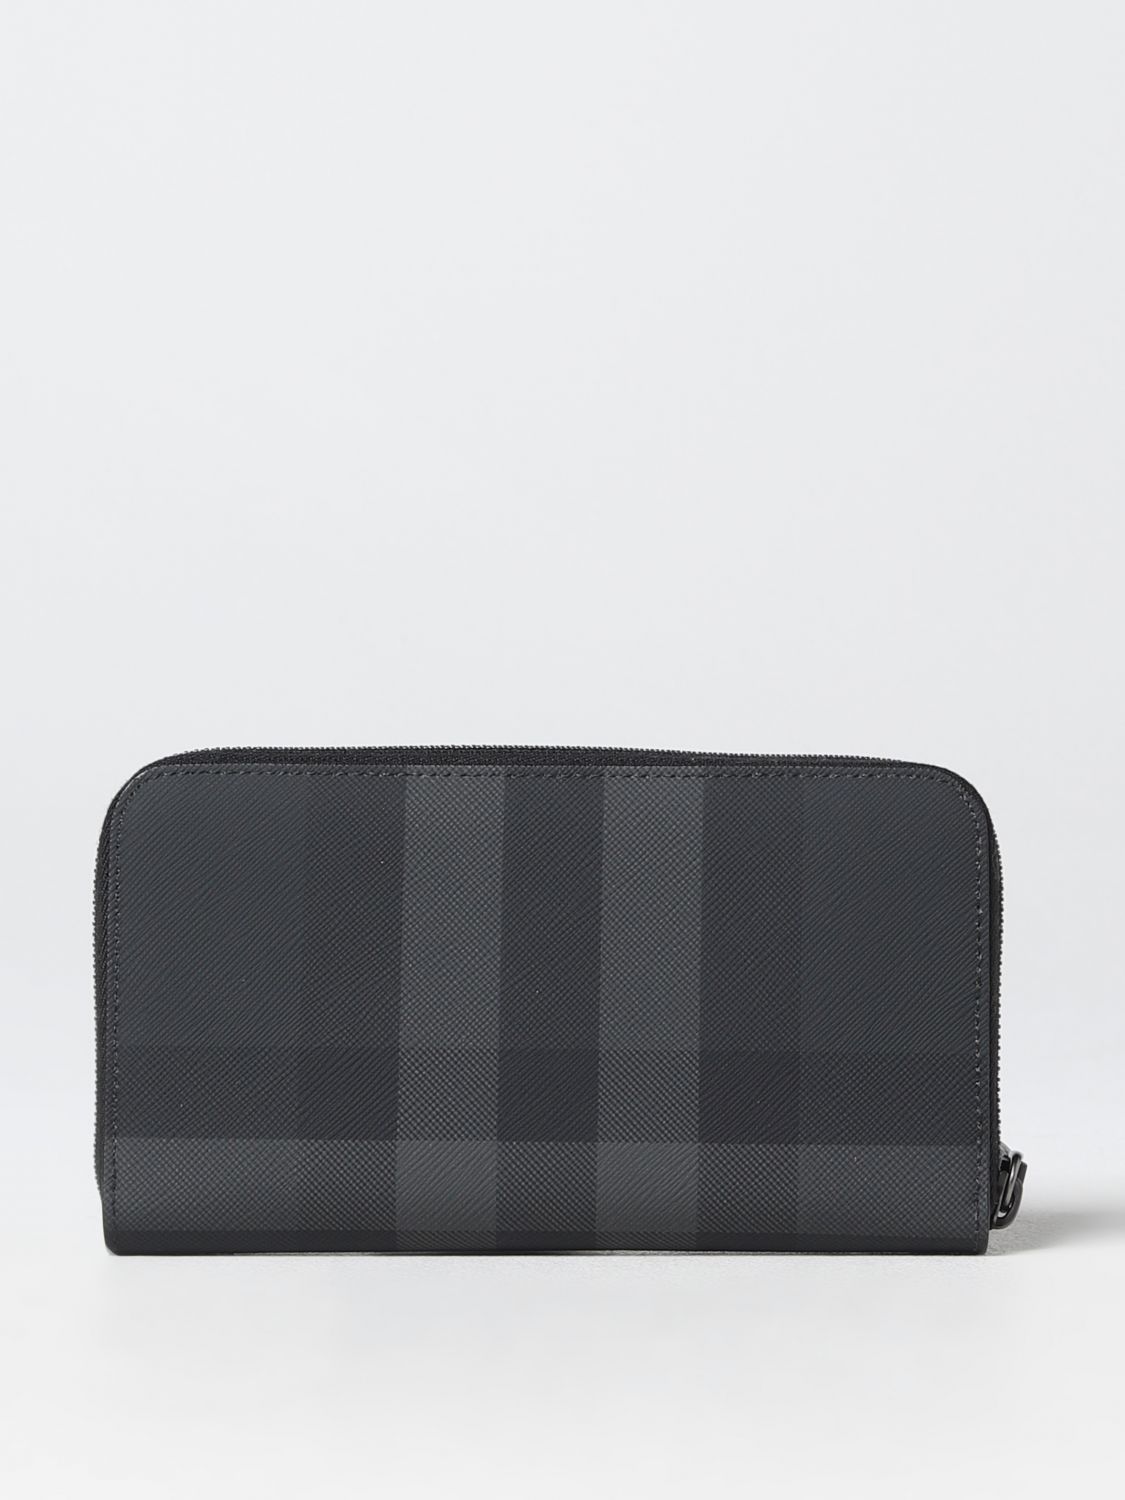 Burberry - Pouch for Man - Black - 8070205-A1208